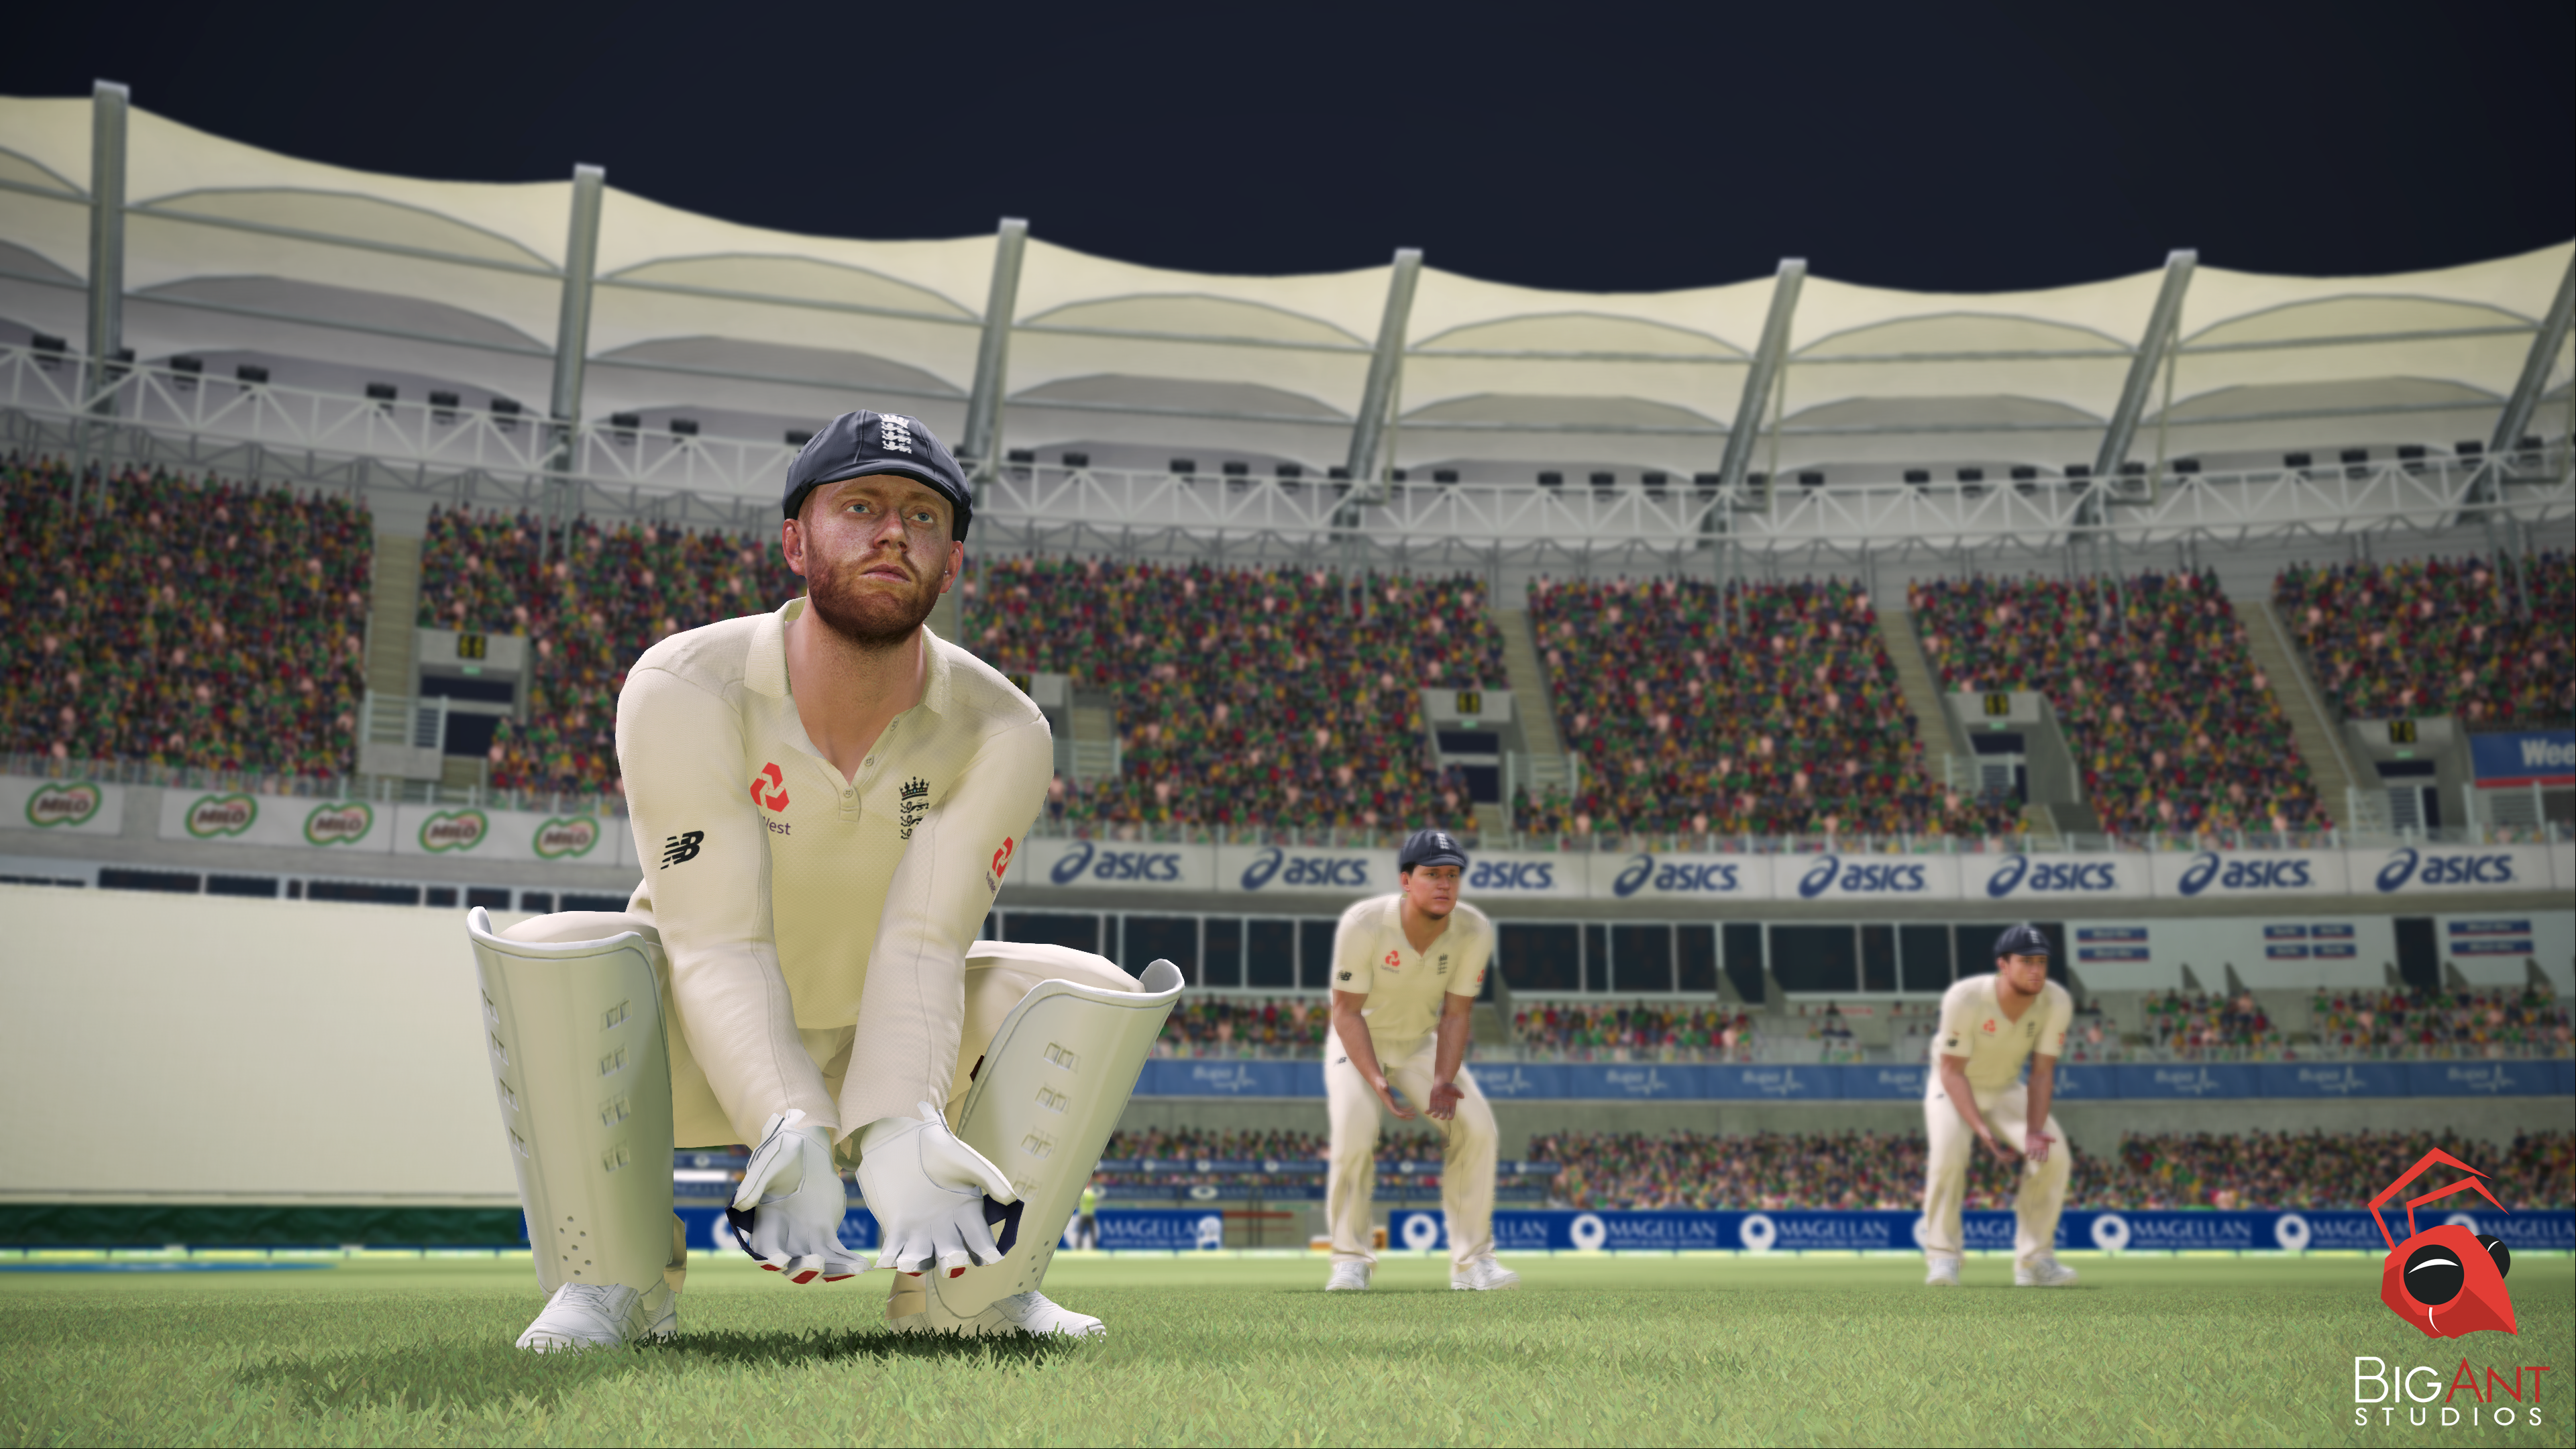 Ashes Cricket Review 2017 image 2